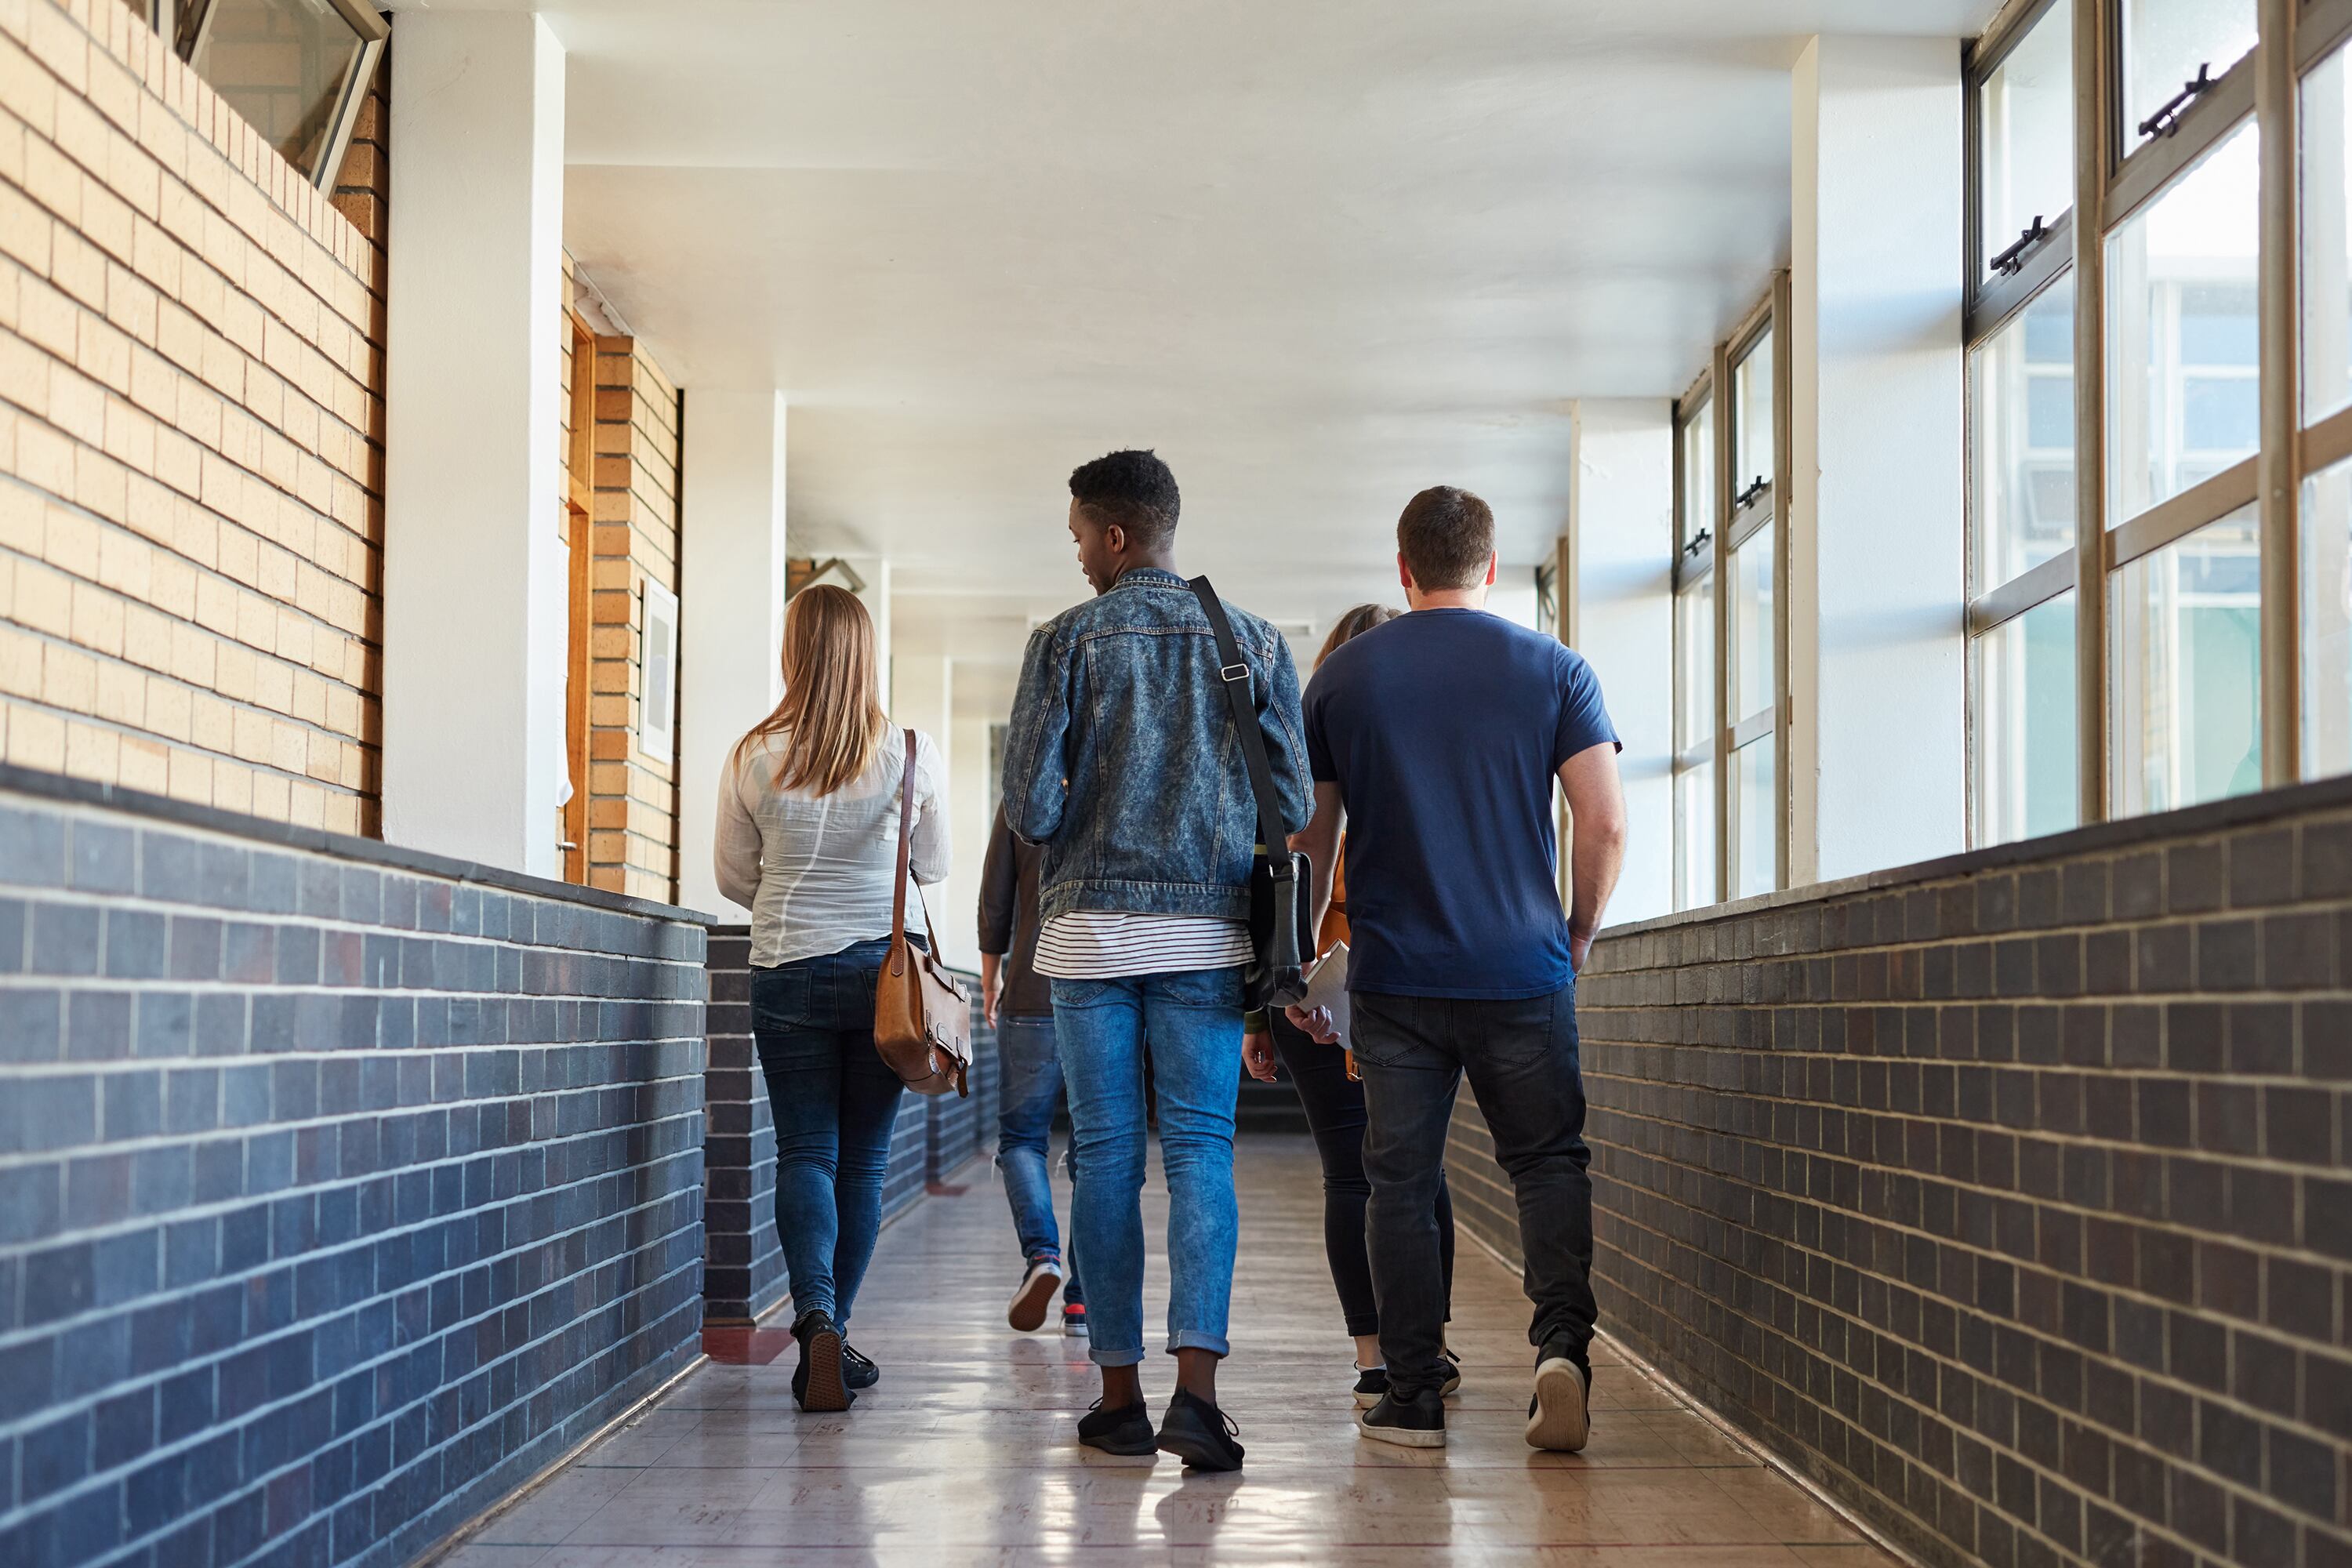 A photo from behind four high school students walking down a well lit hallway with a brick wall on the left and windows on the right.